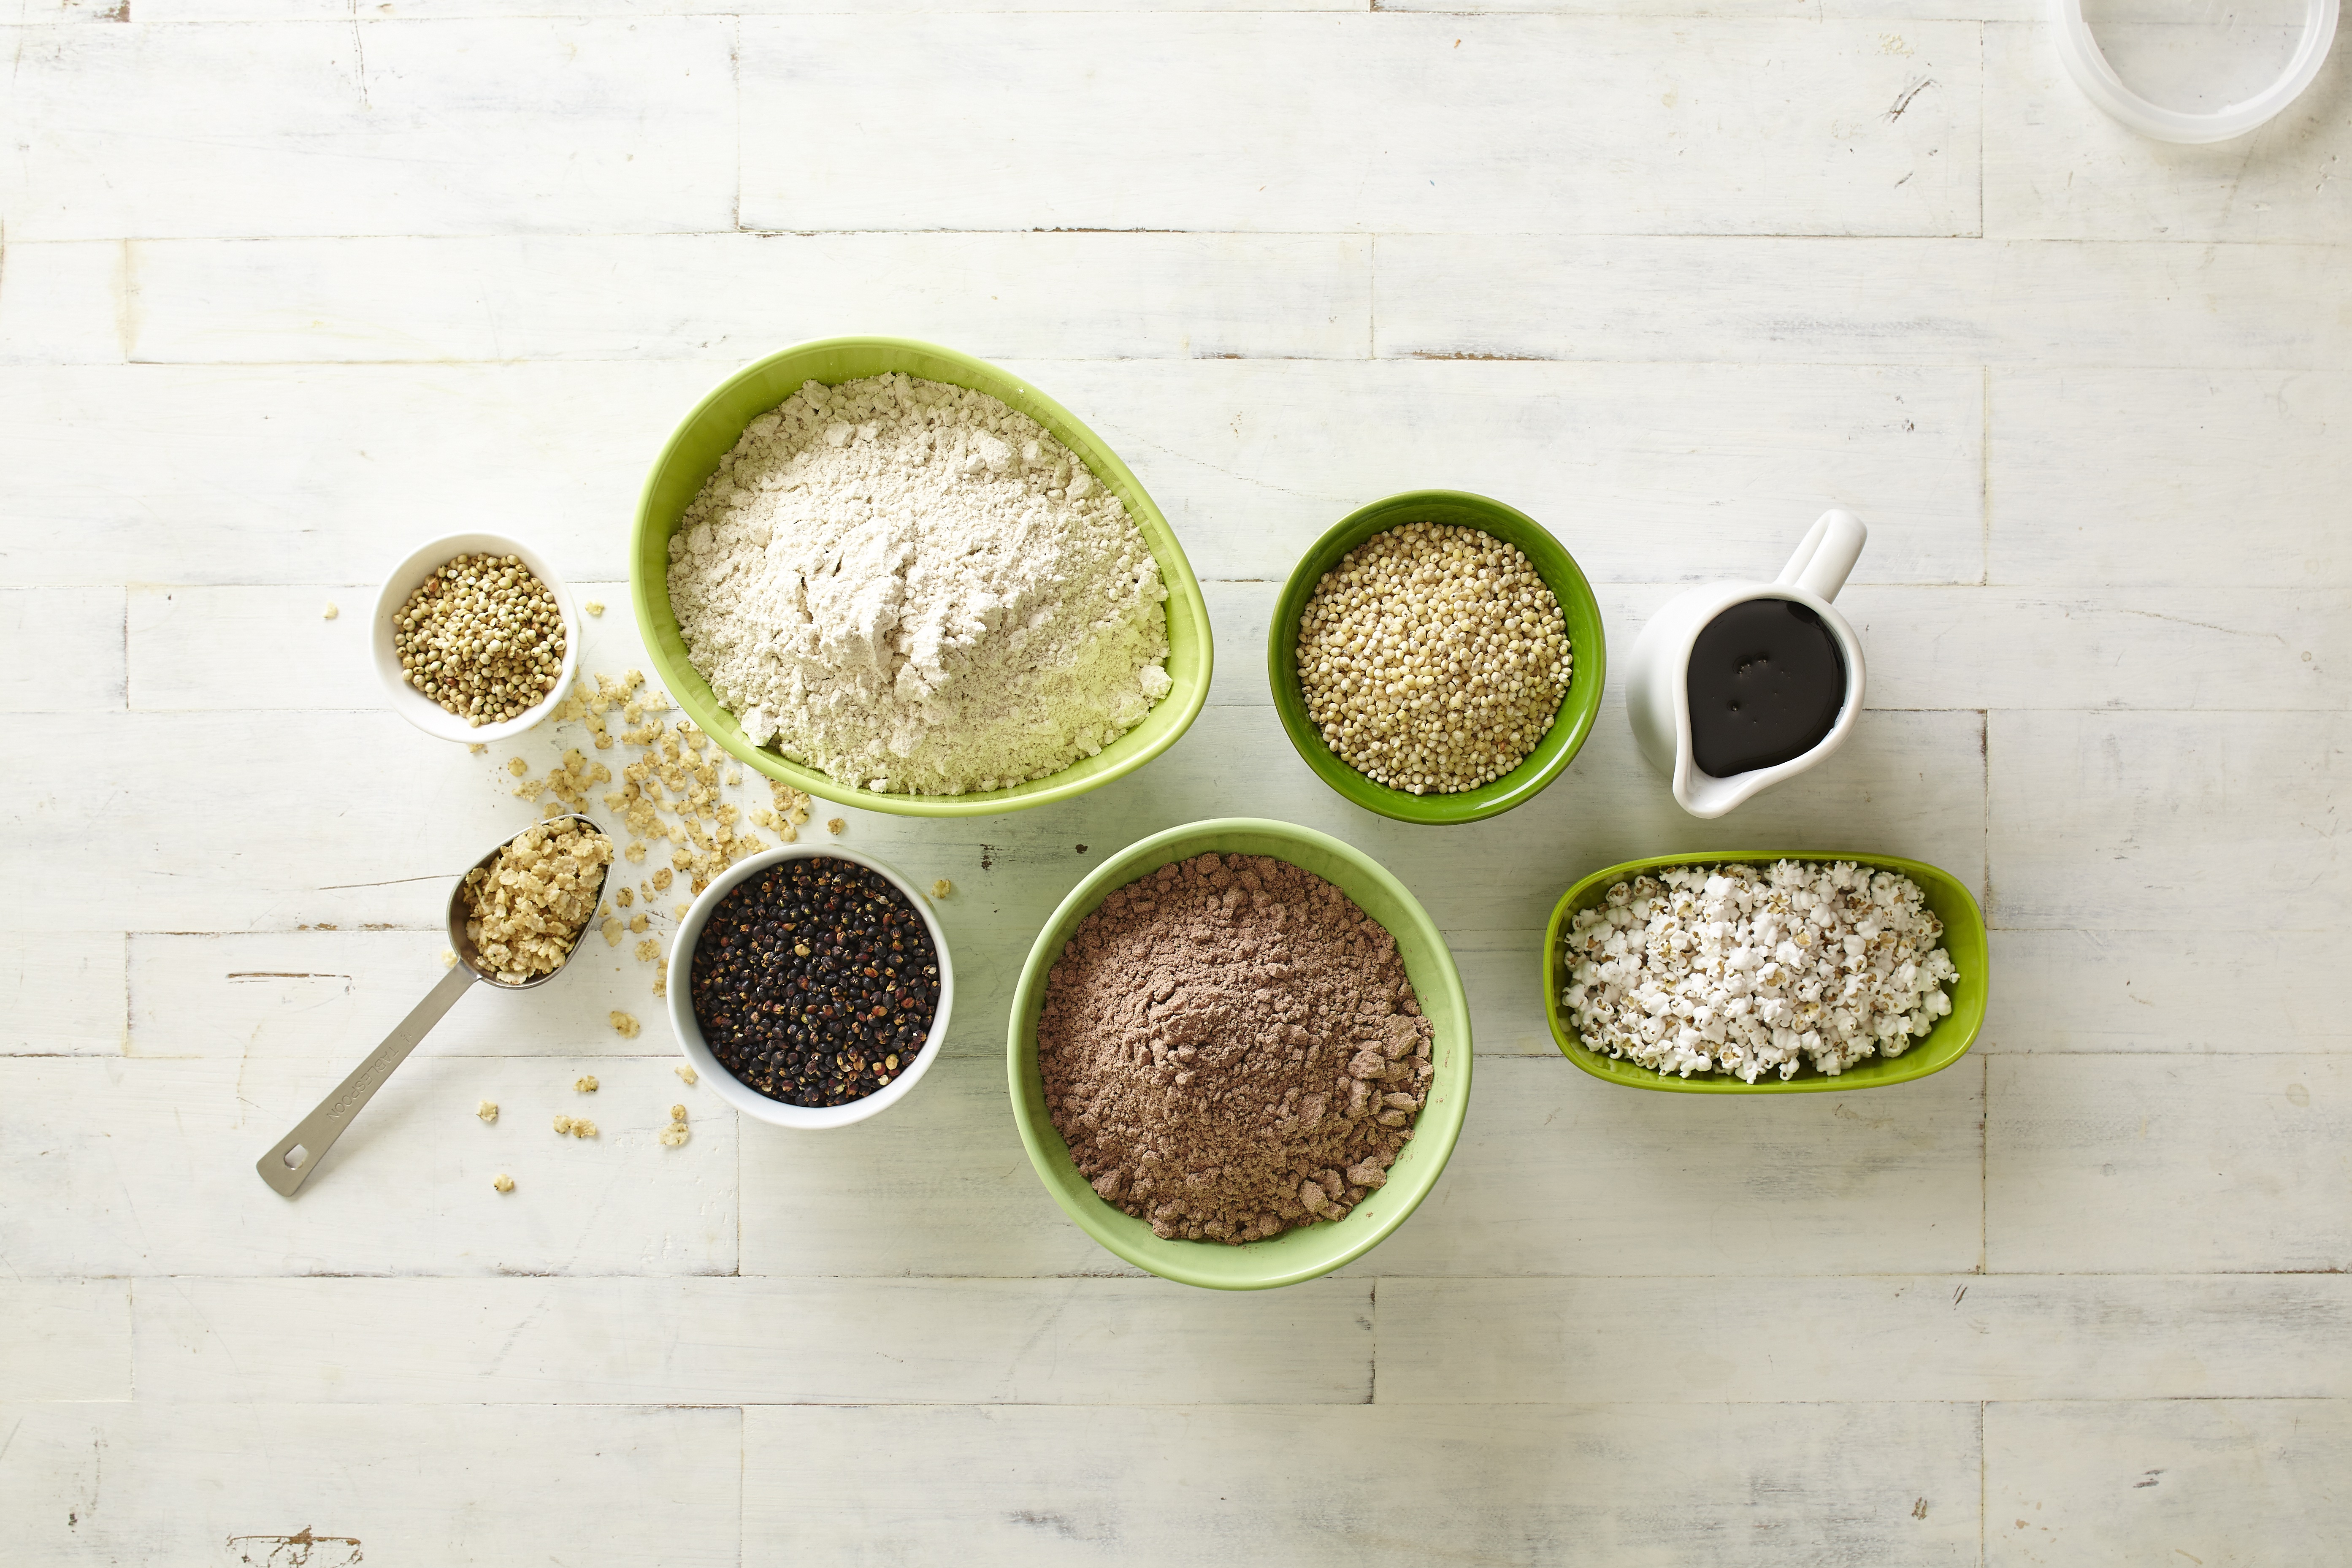 different forms of sorghum - white, black, sorghum flour, sorghum syrup, popped sorghum and flaked sorghum -  in green bowls on a white table